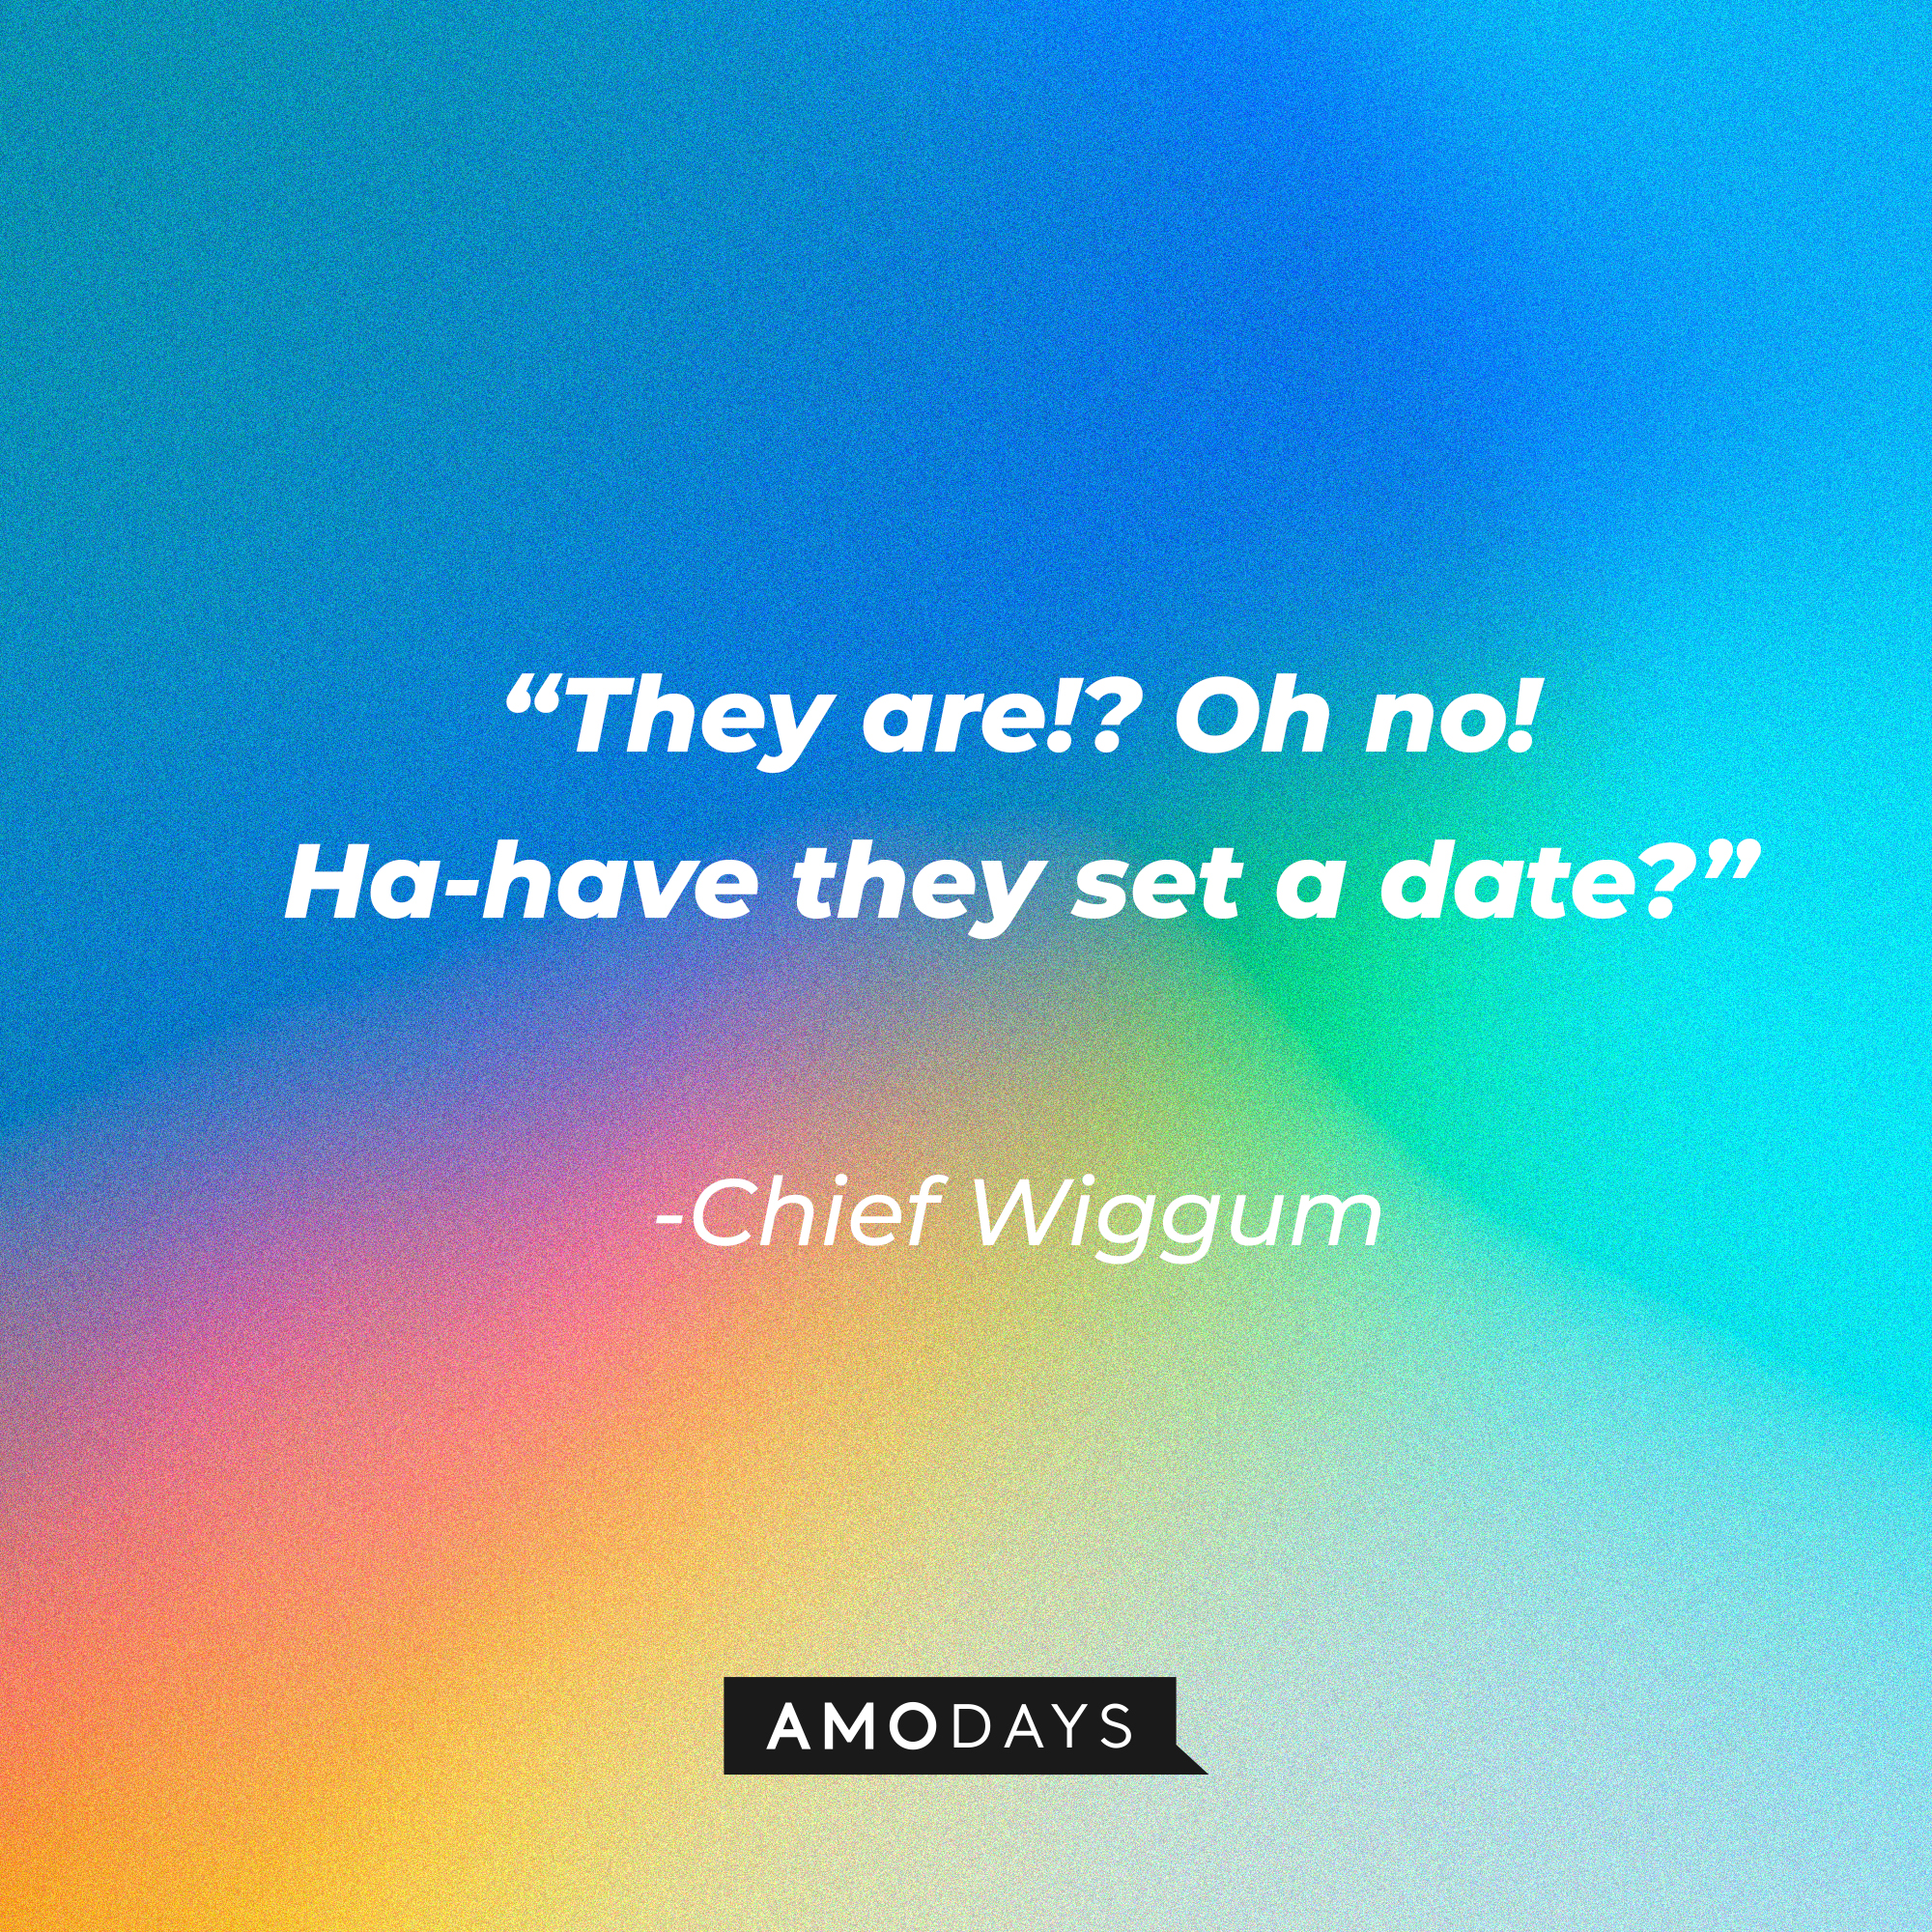 Chief Wiggum’s quote: “They are!? Oh no! Ha-have they set a date?” | Source: Amodays